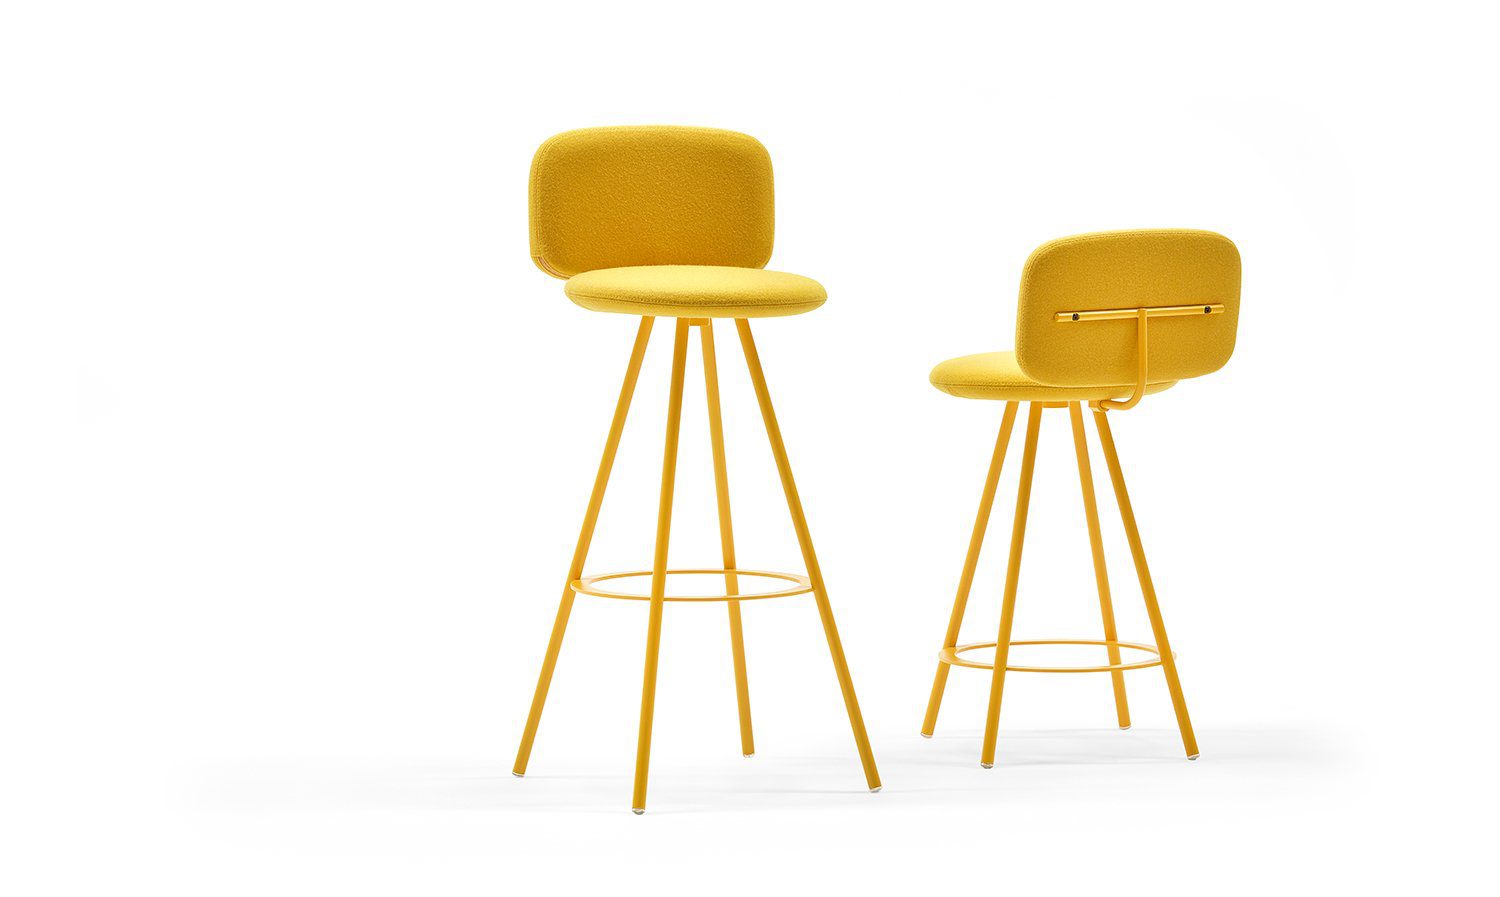 Beautiful yellow color chair pair on a white background